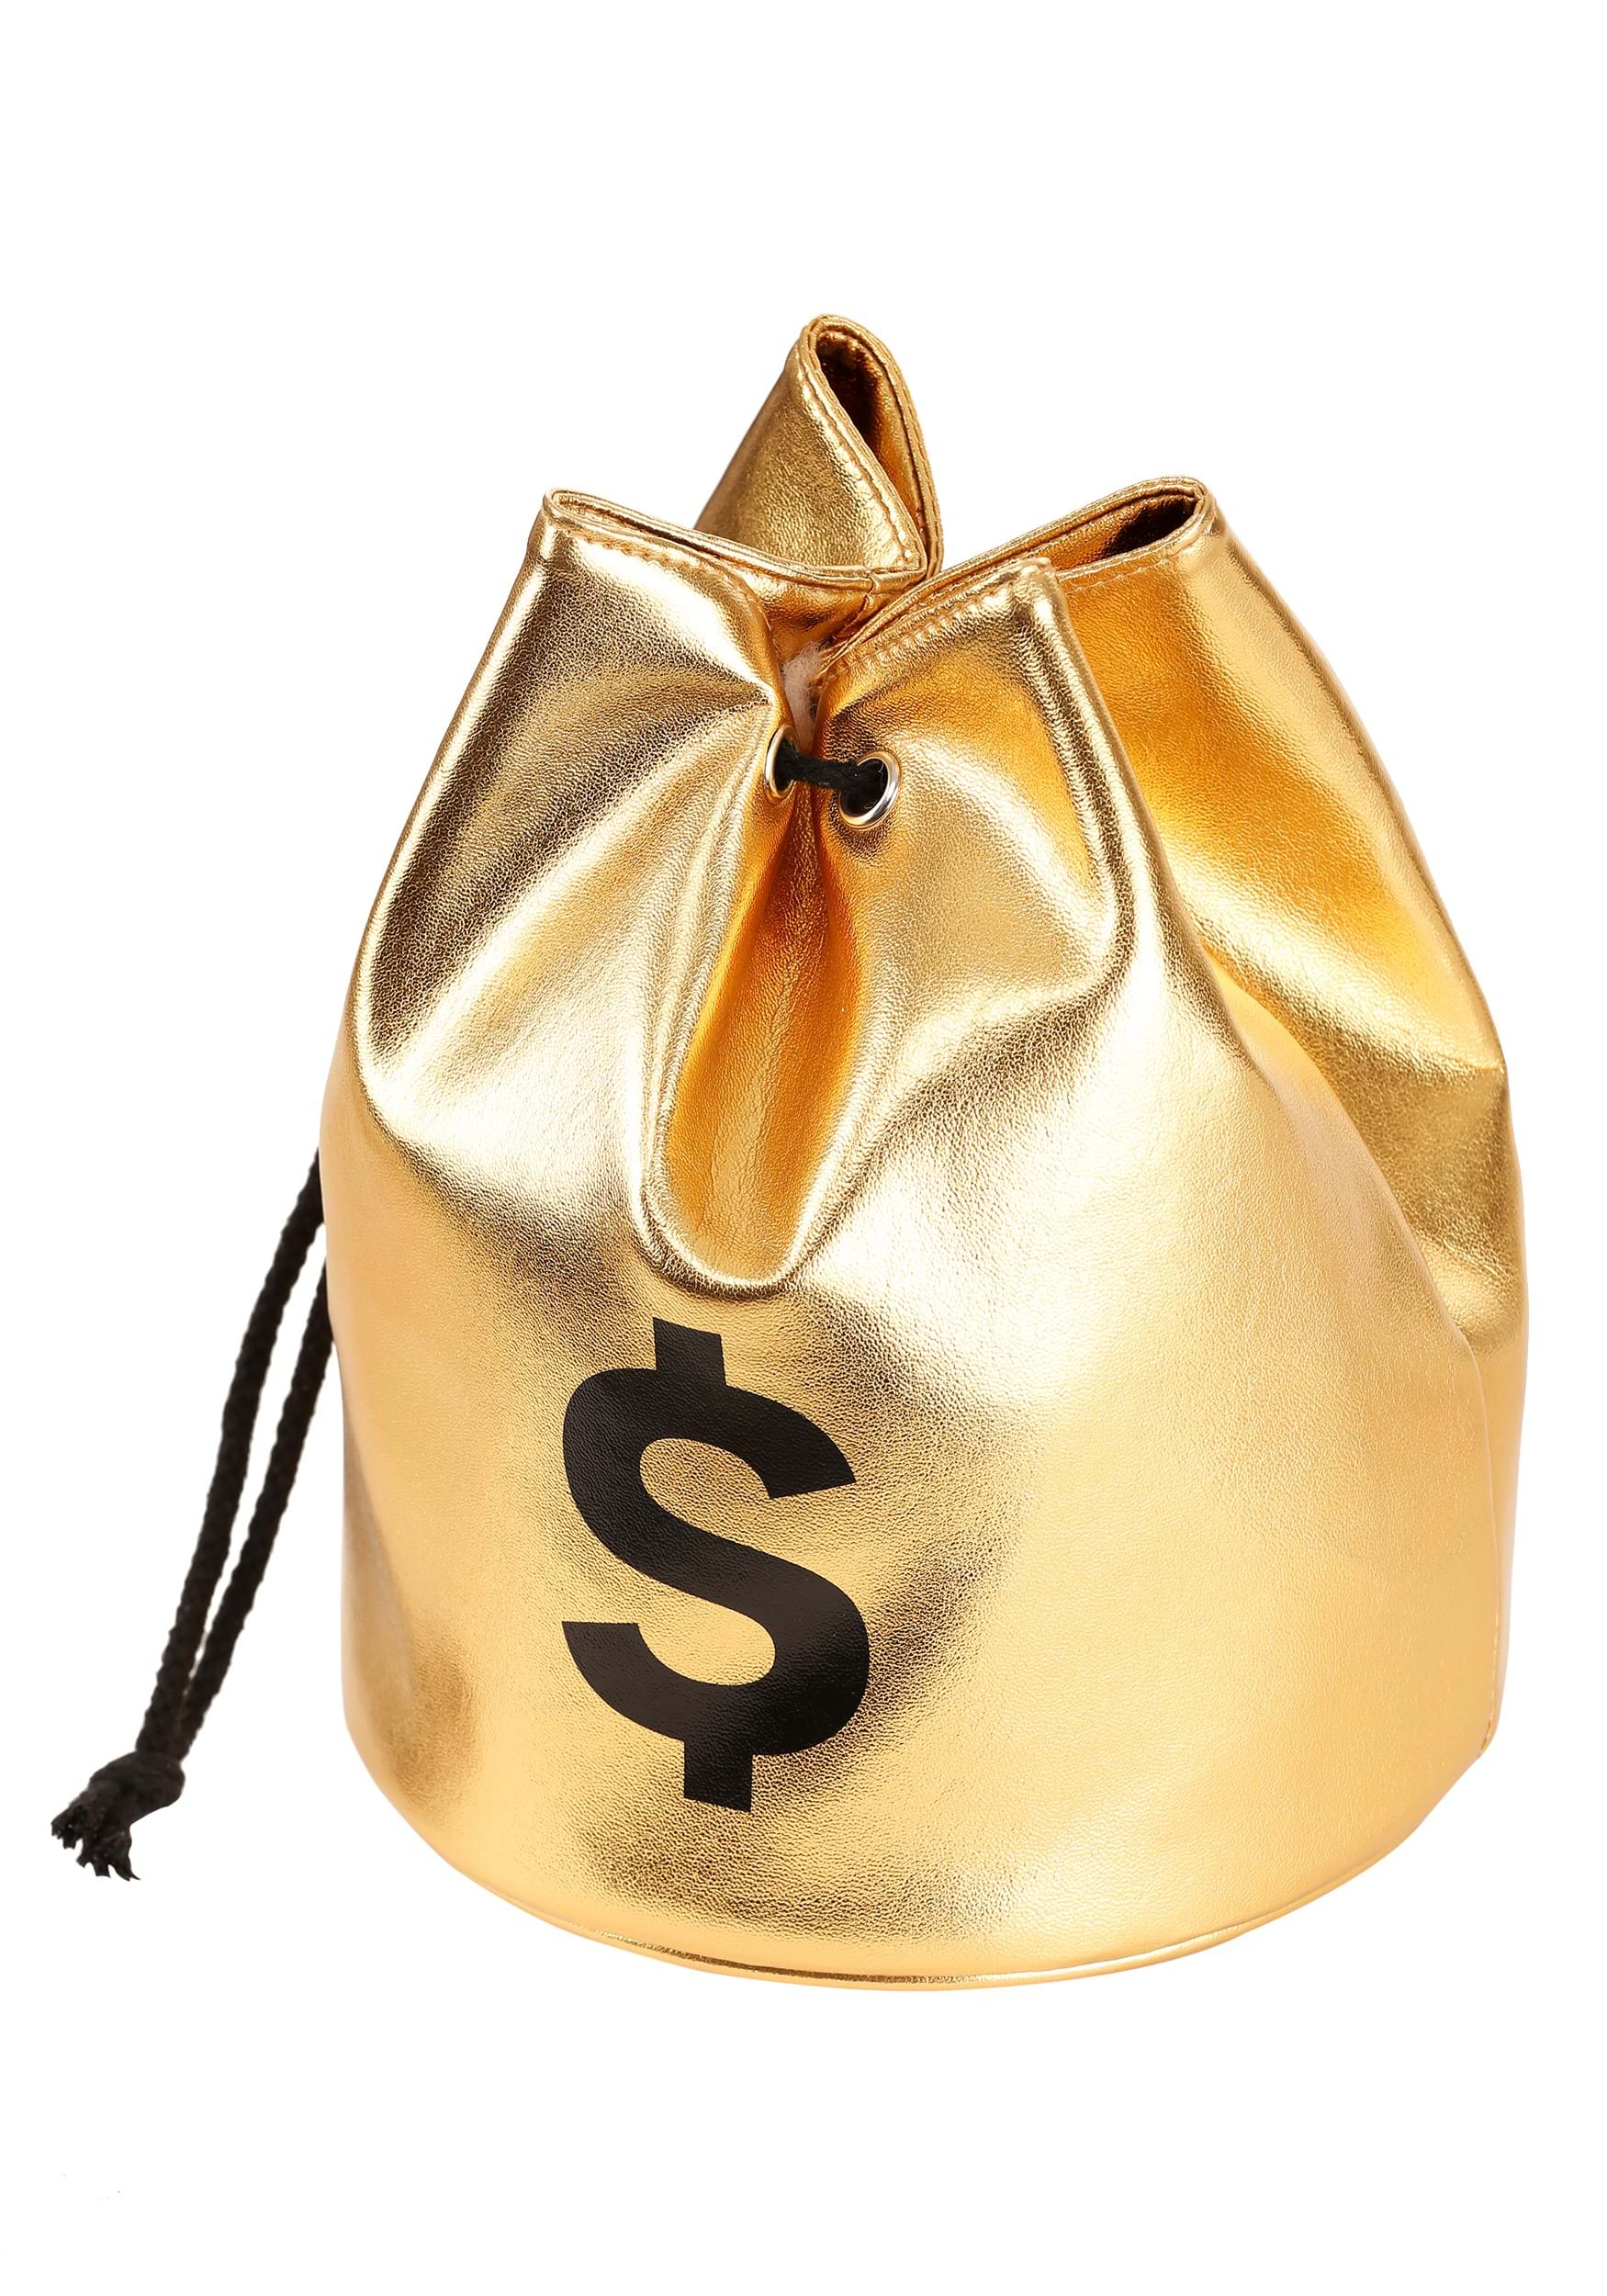 Elegant Satin / Organza Money Bag Purse Clutch Gold Wedding , Party  ,special Occasion, Simple and Elegant Addition to Your Evening Dress - Etsy